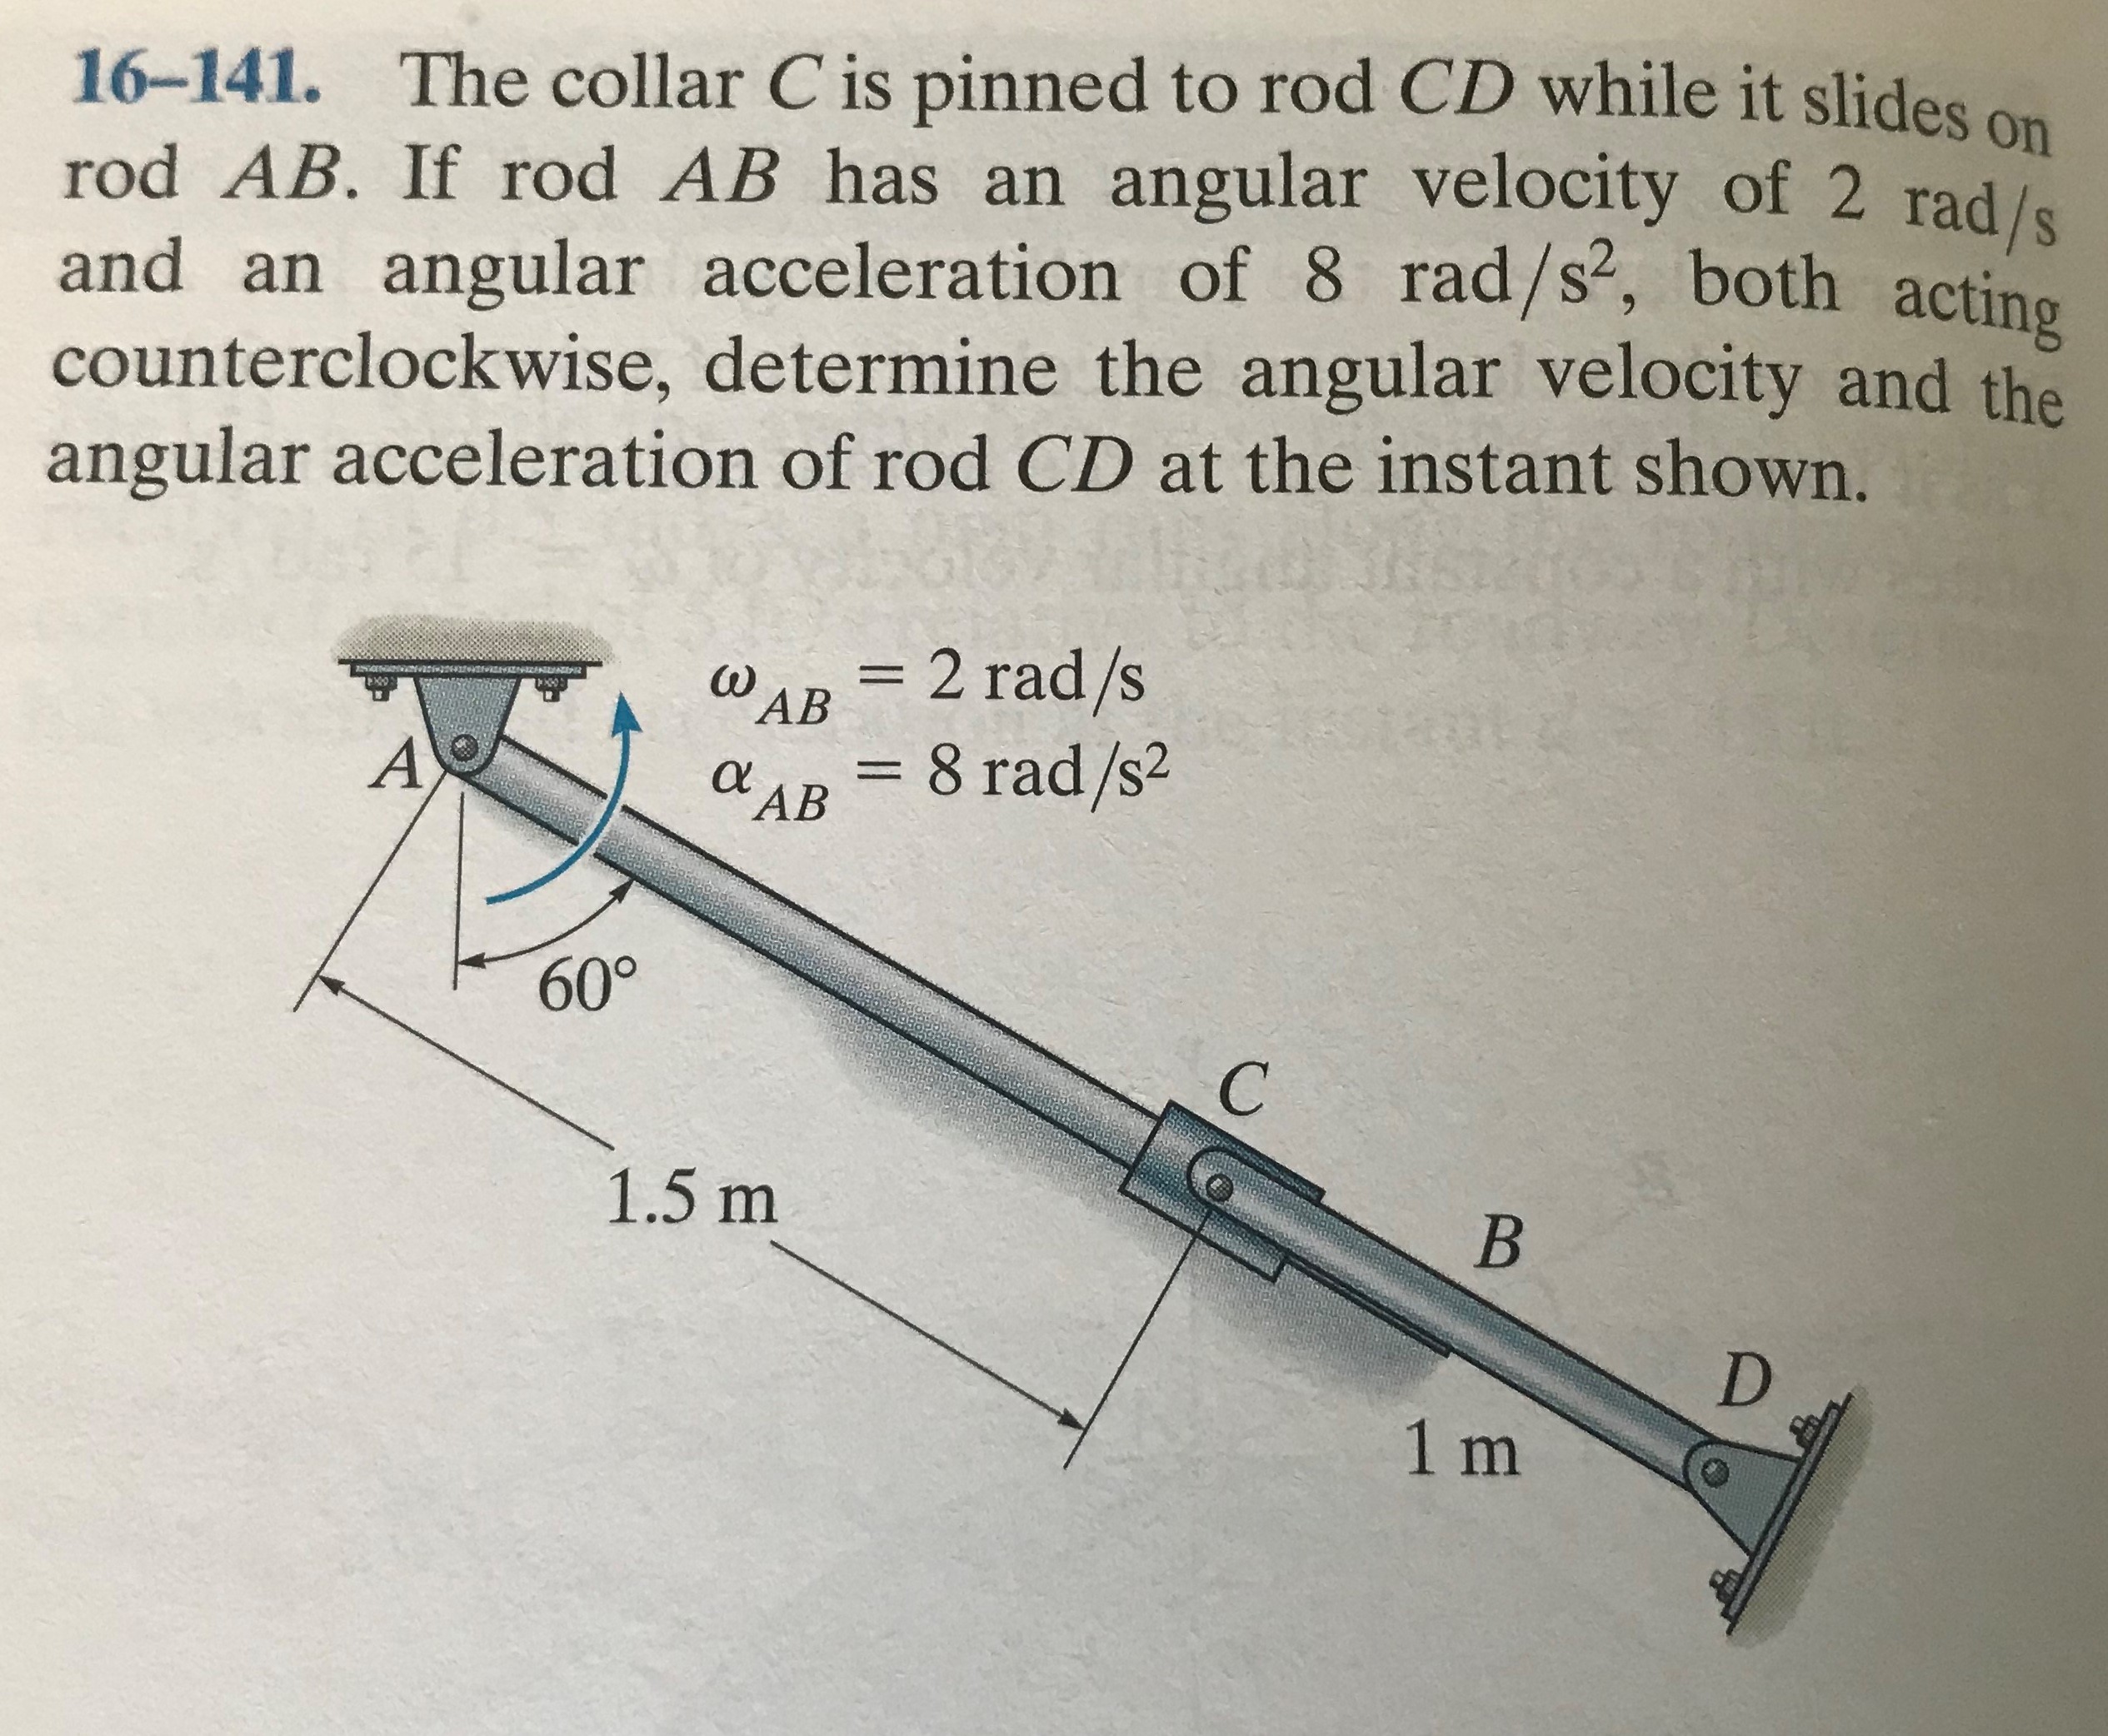 16-141. The collar C is pinned to rod CD while it slides on
rod AB. If rod AB has an angular velocity of 2 rad/s
and an angular acceleration of 8 rad/s², both acting
counterclockwise, determine the angular velocity and the
angular acceleration of rod CD at the instant shown.
S.
= 2 rad/s
WAB
%3D
= 8 rad/s2
a AB
60°
1.5 m
1m
